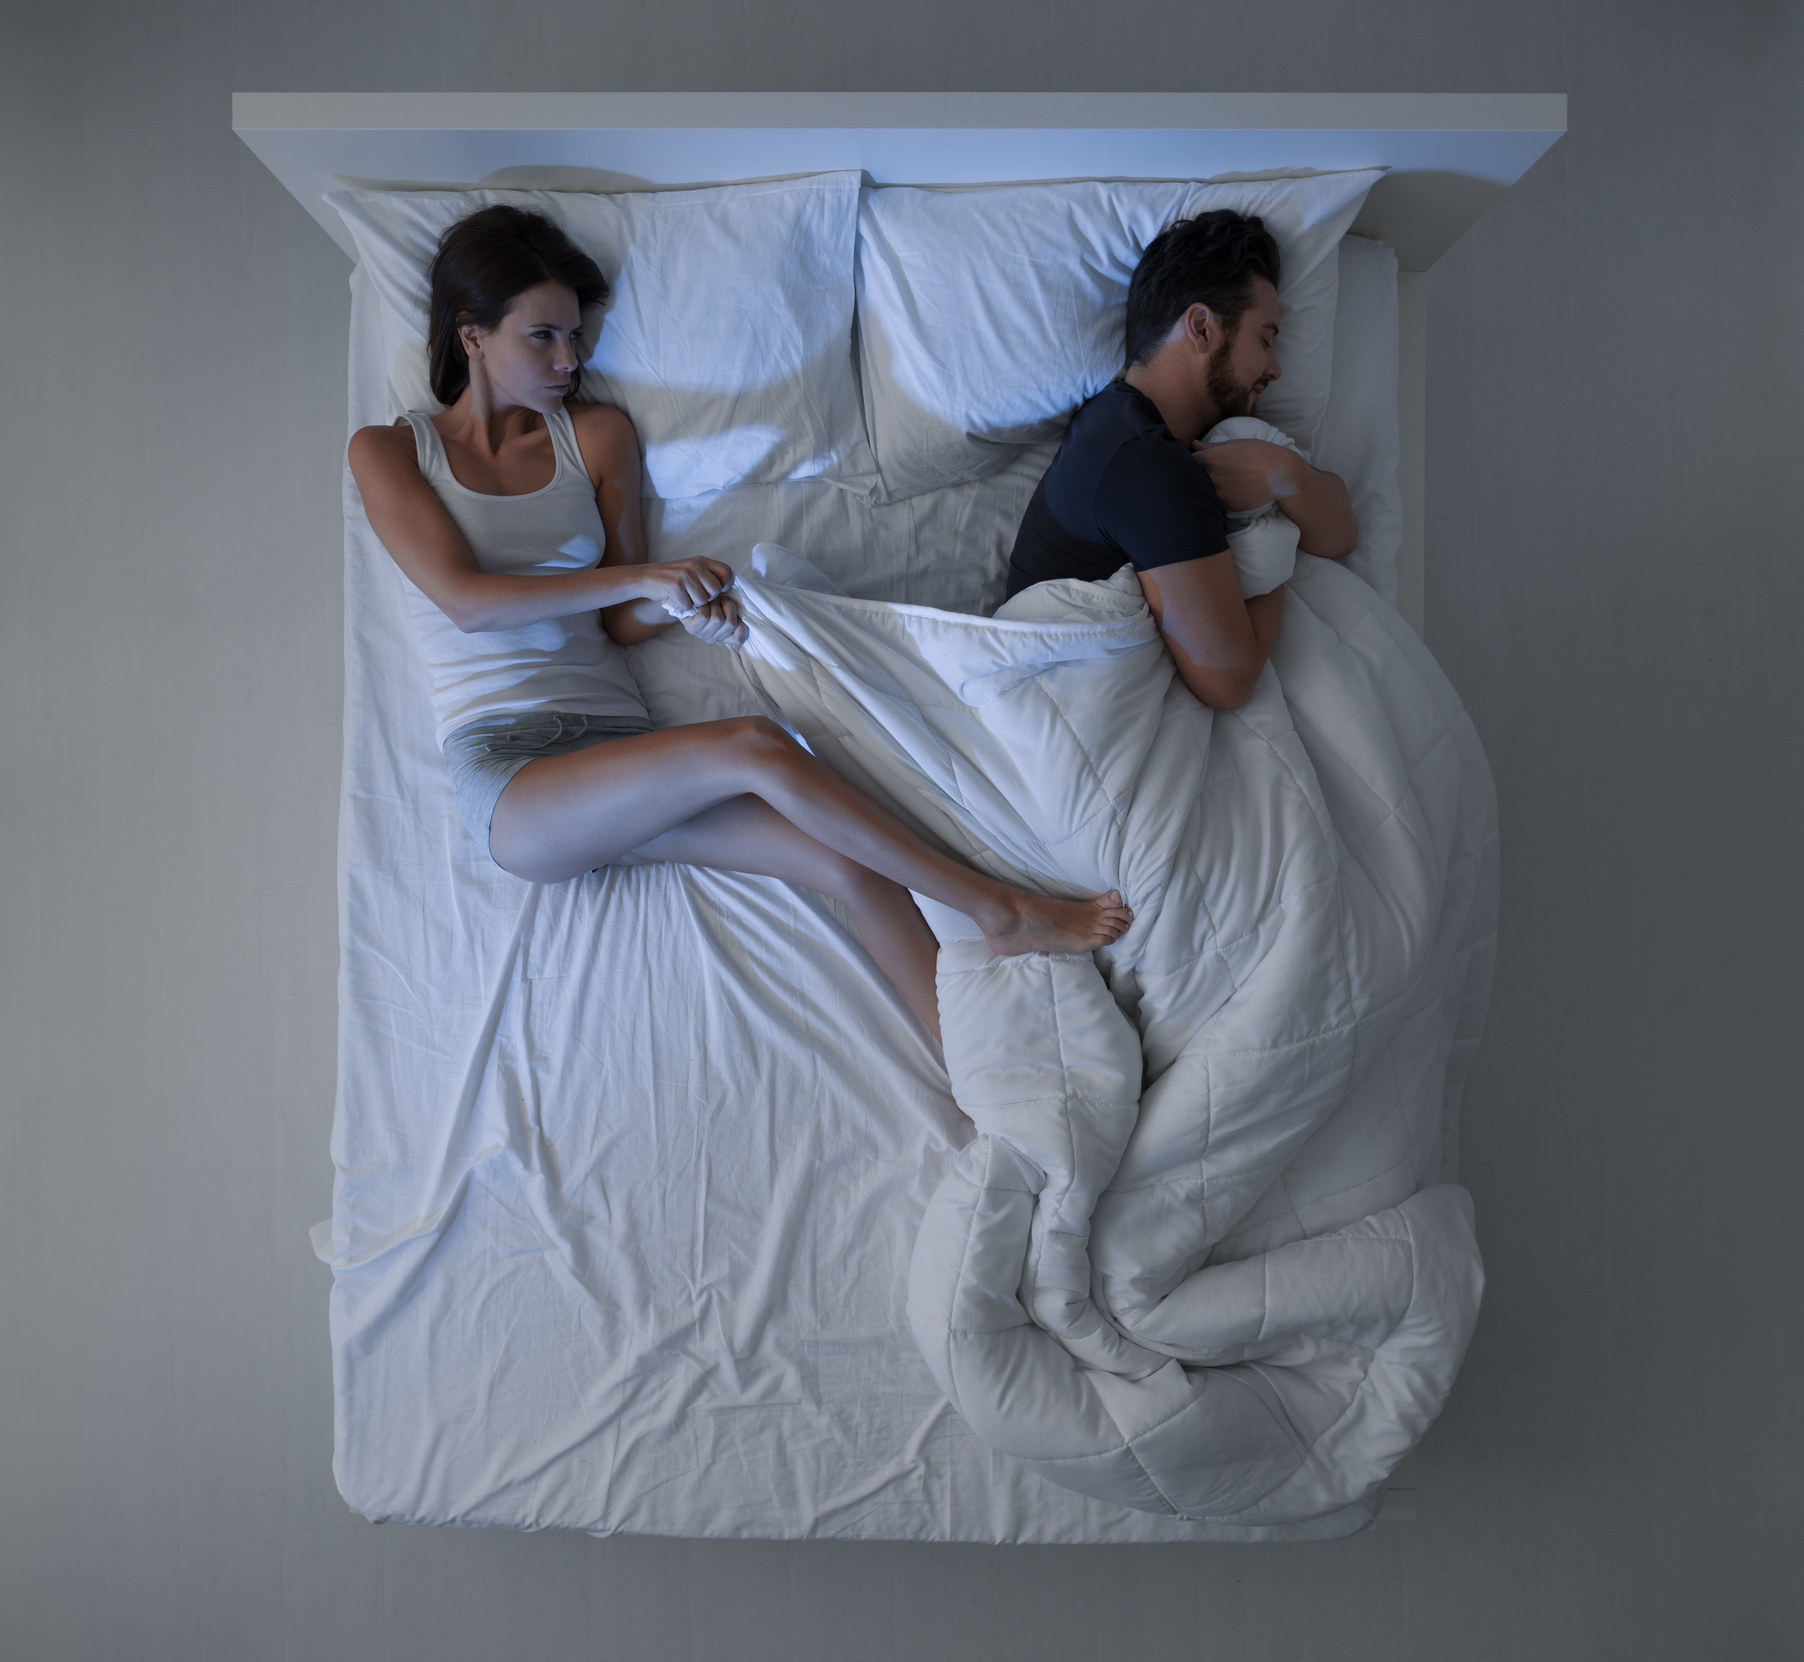 woman in bed trying to pull the covers from her partner